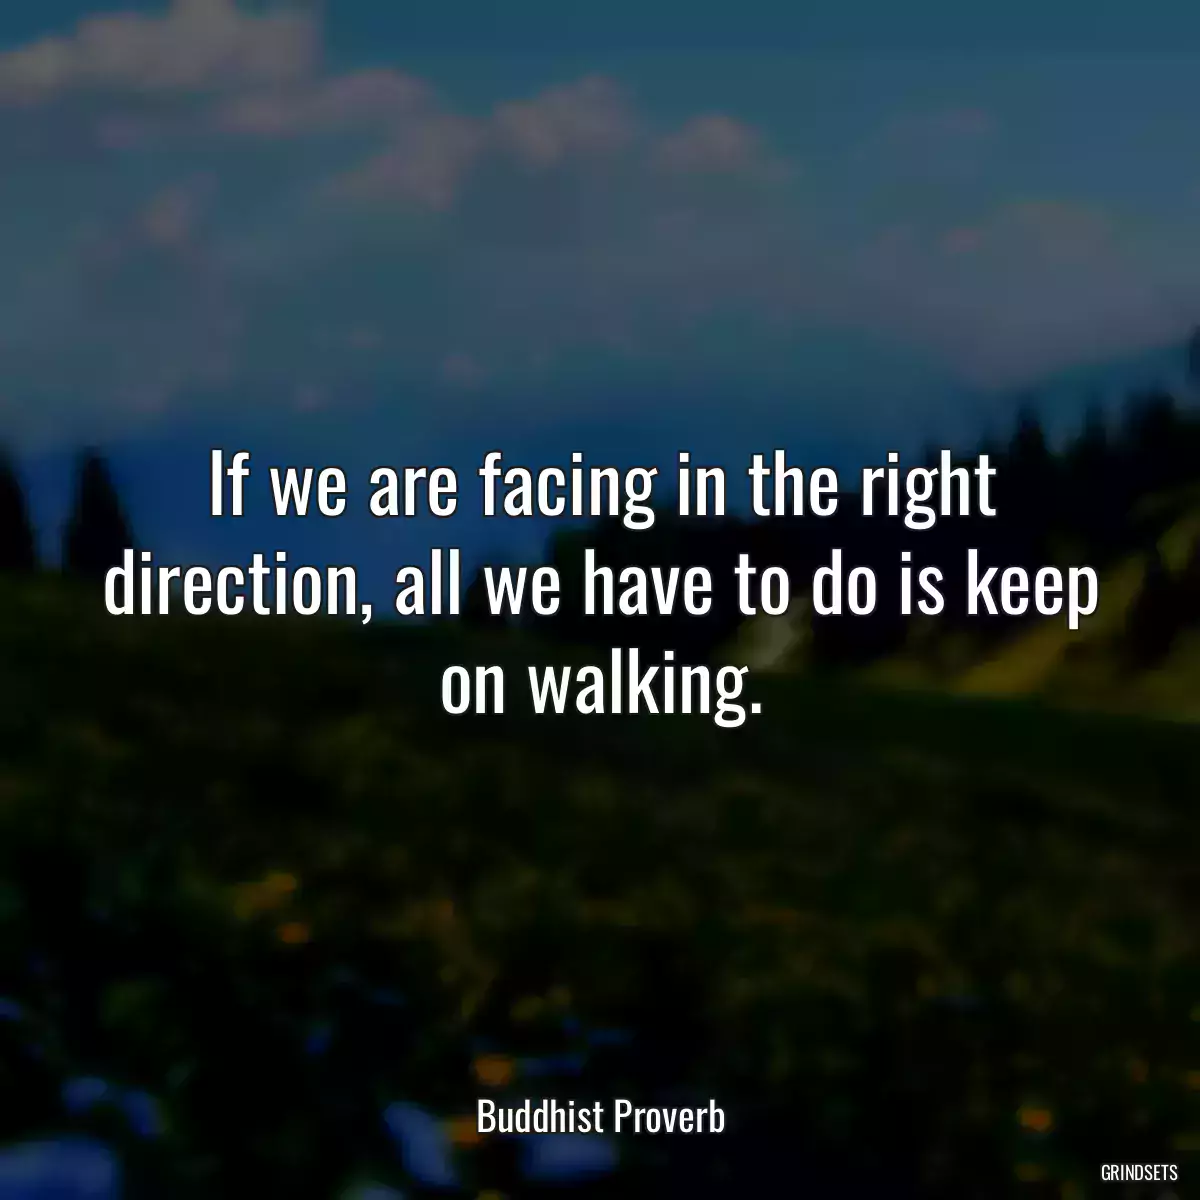 If we are facing in the right direction, all we have to do is keep on walking.